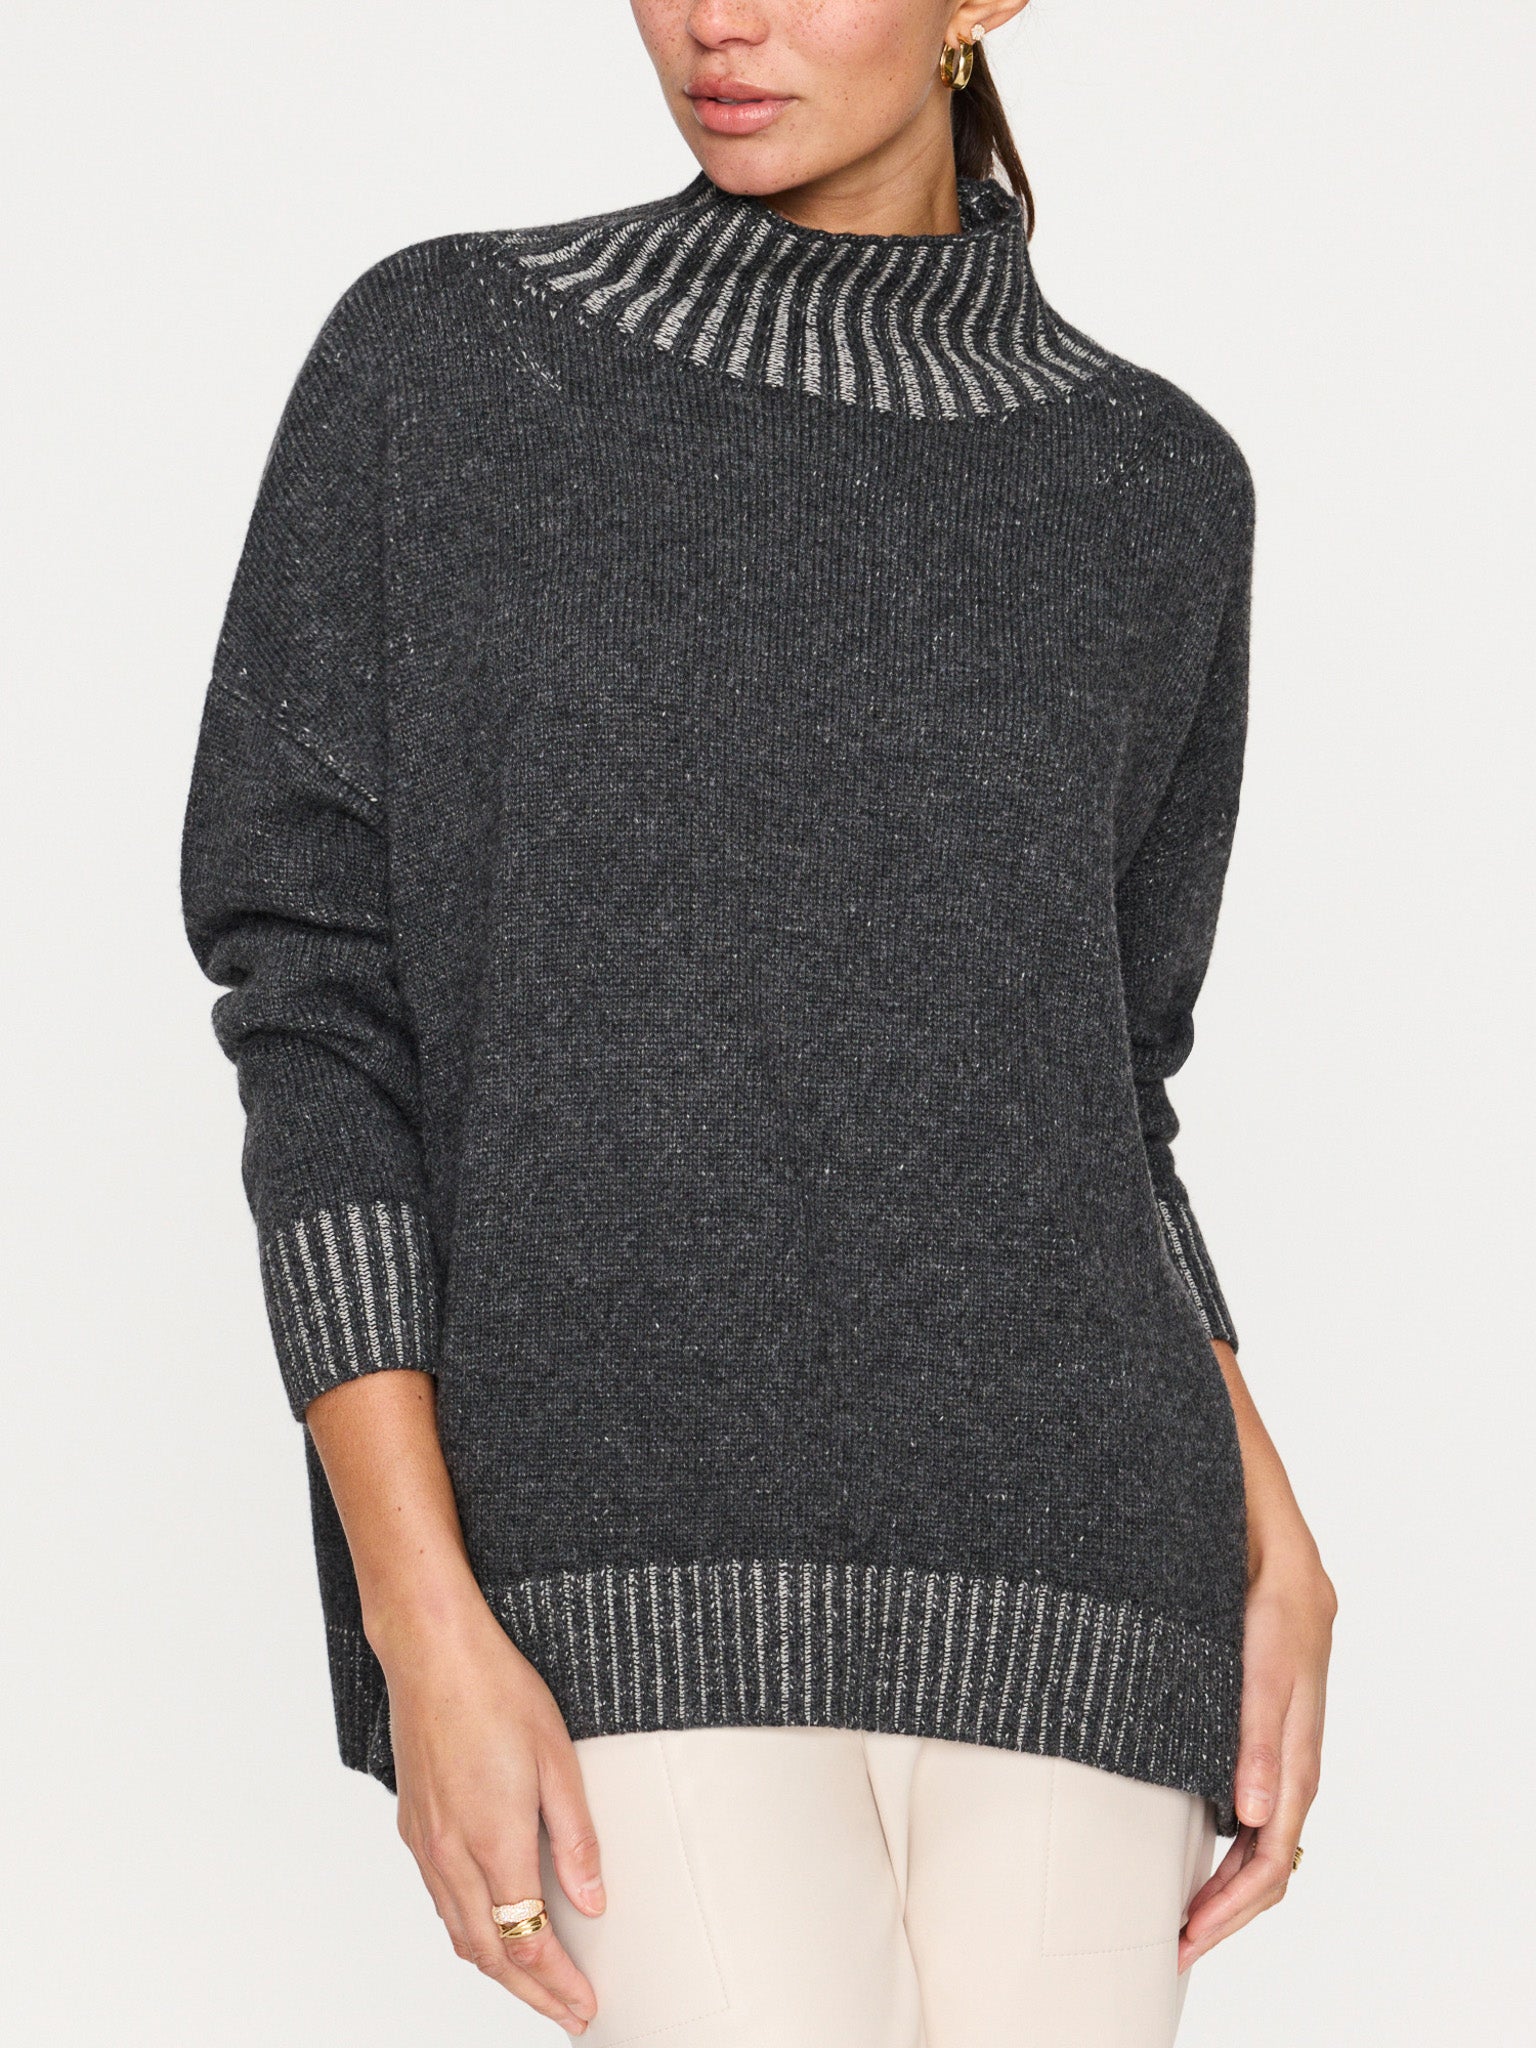 Ana gray turtleneck sweater front view 3